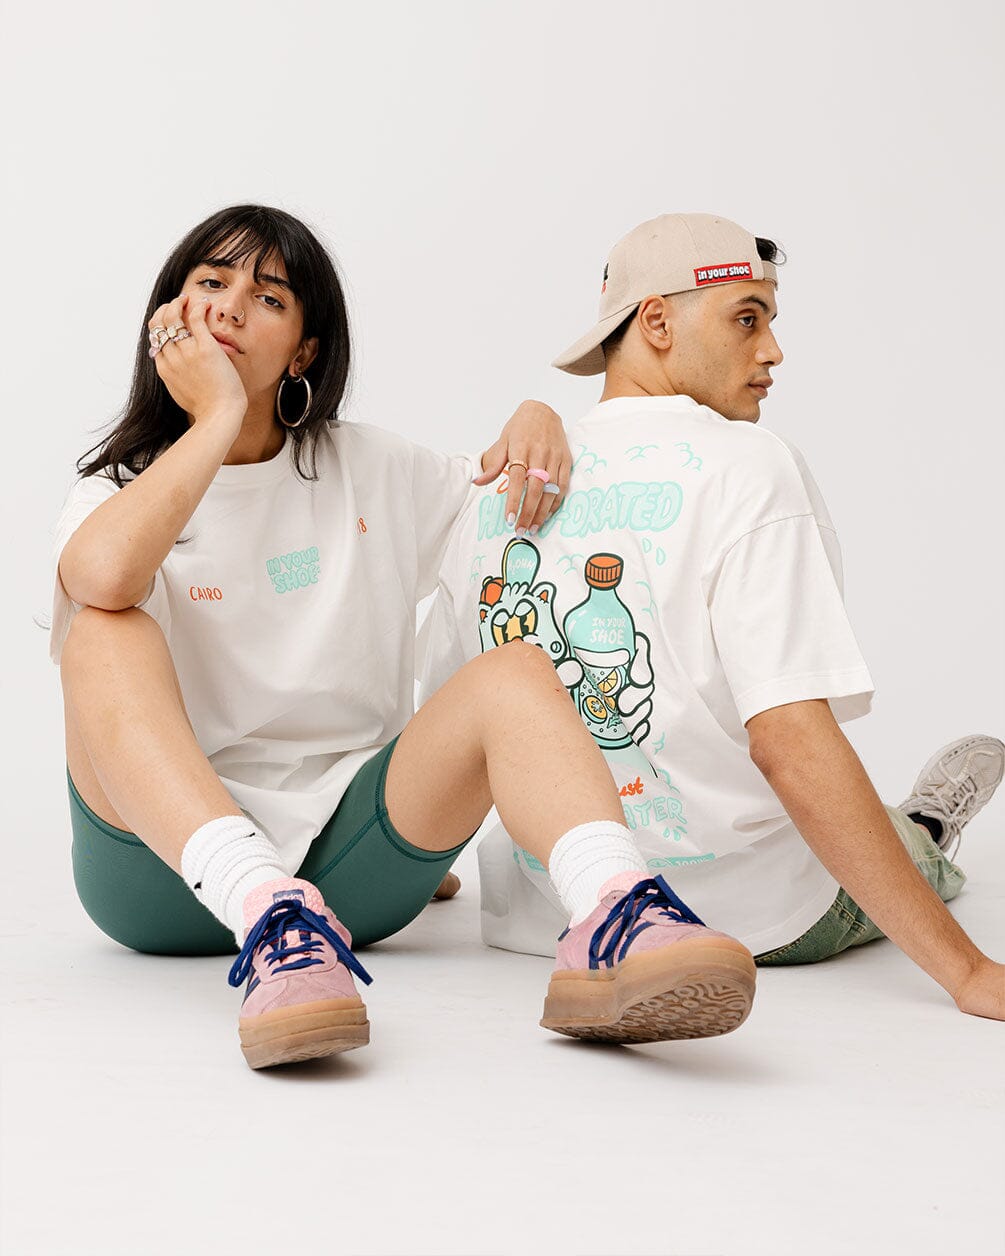 Stay Highdrated Printed Oversized Tee Printed Oversized Tees In Your Shoe 